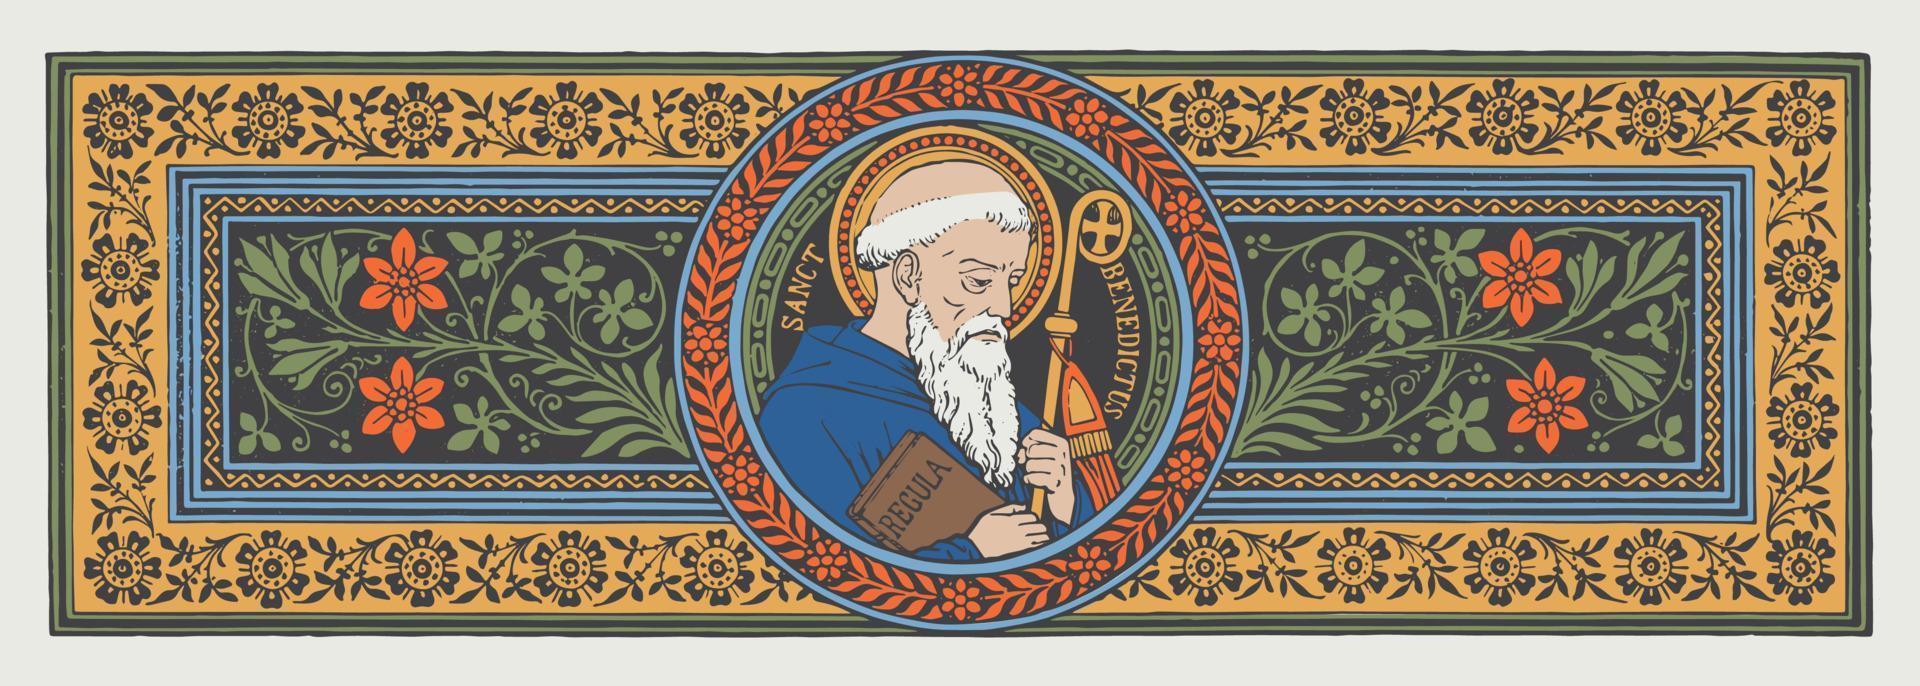 St. Benedict of Nursia, Catholic engraving vector. Catholic monk. Catholic Saint. Father of Western monasticism. Patron saint of Europe. Lived from 480 - 547 A.D vector